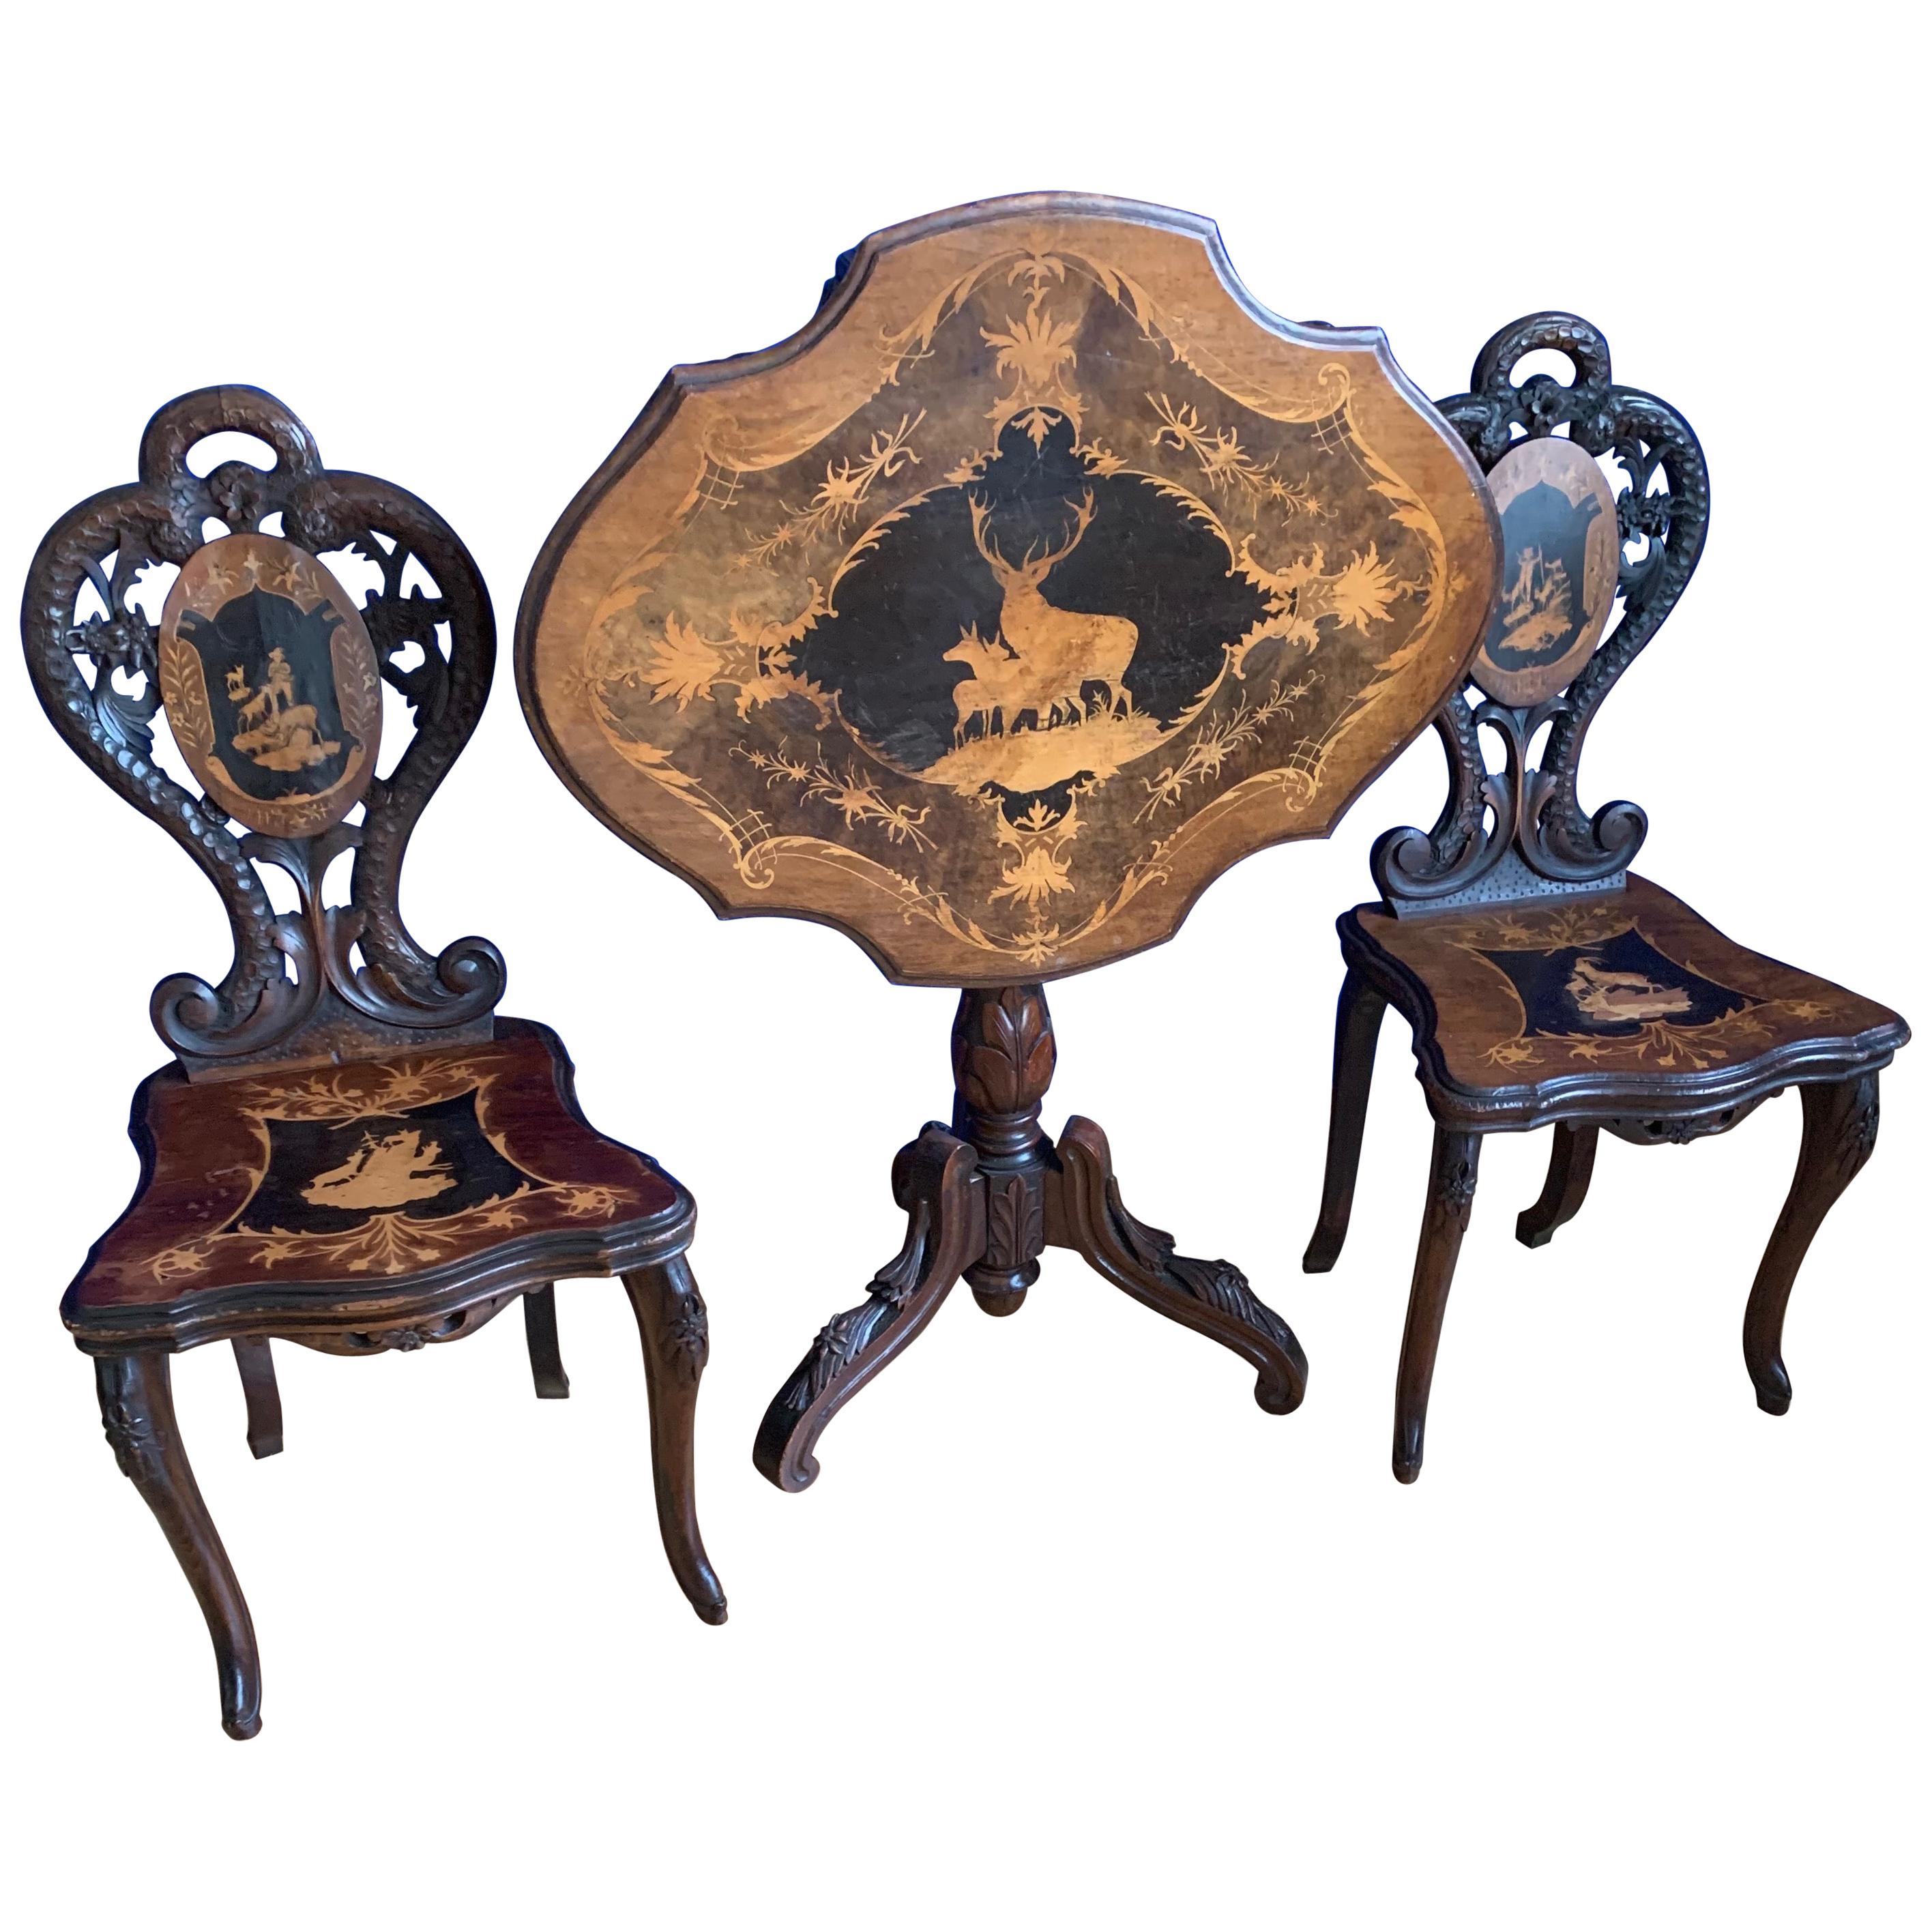 Pair of Antique Swiss Black Forest Chairs w. Matching Tilt-Top Table, Late 1800s